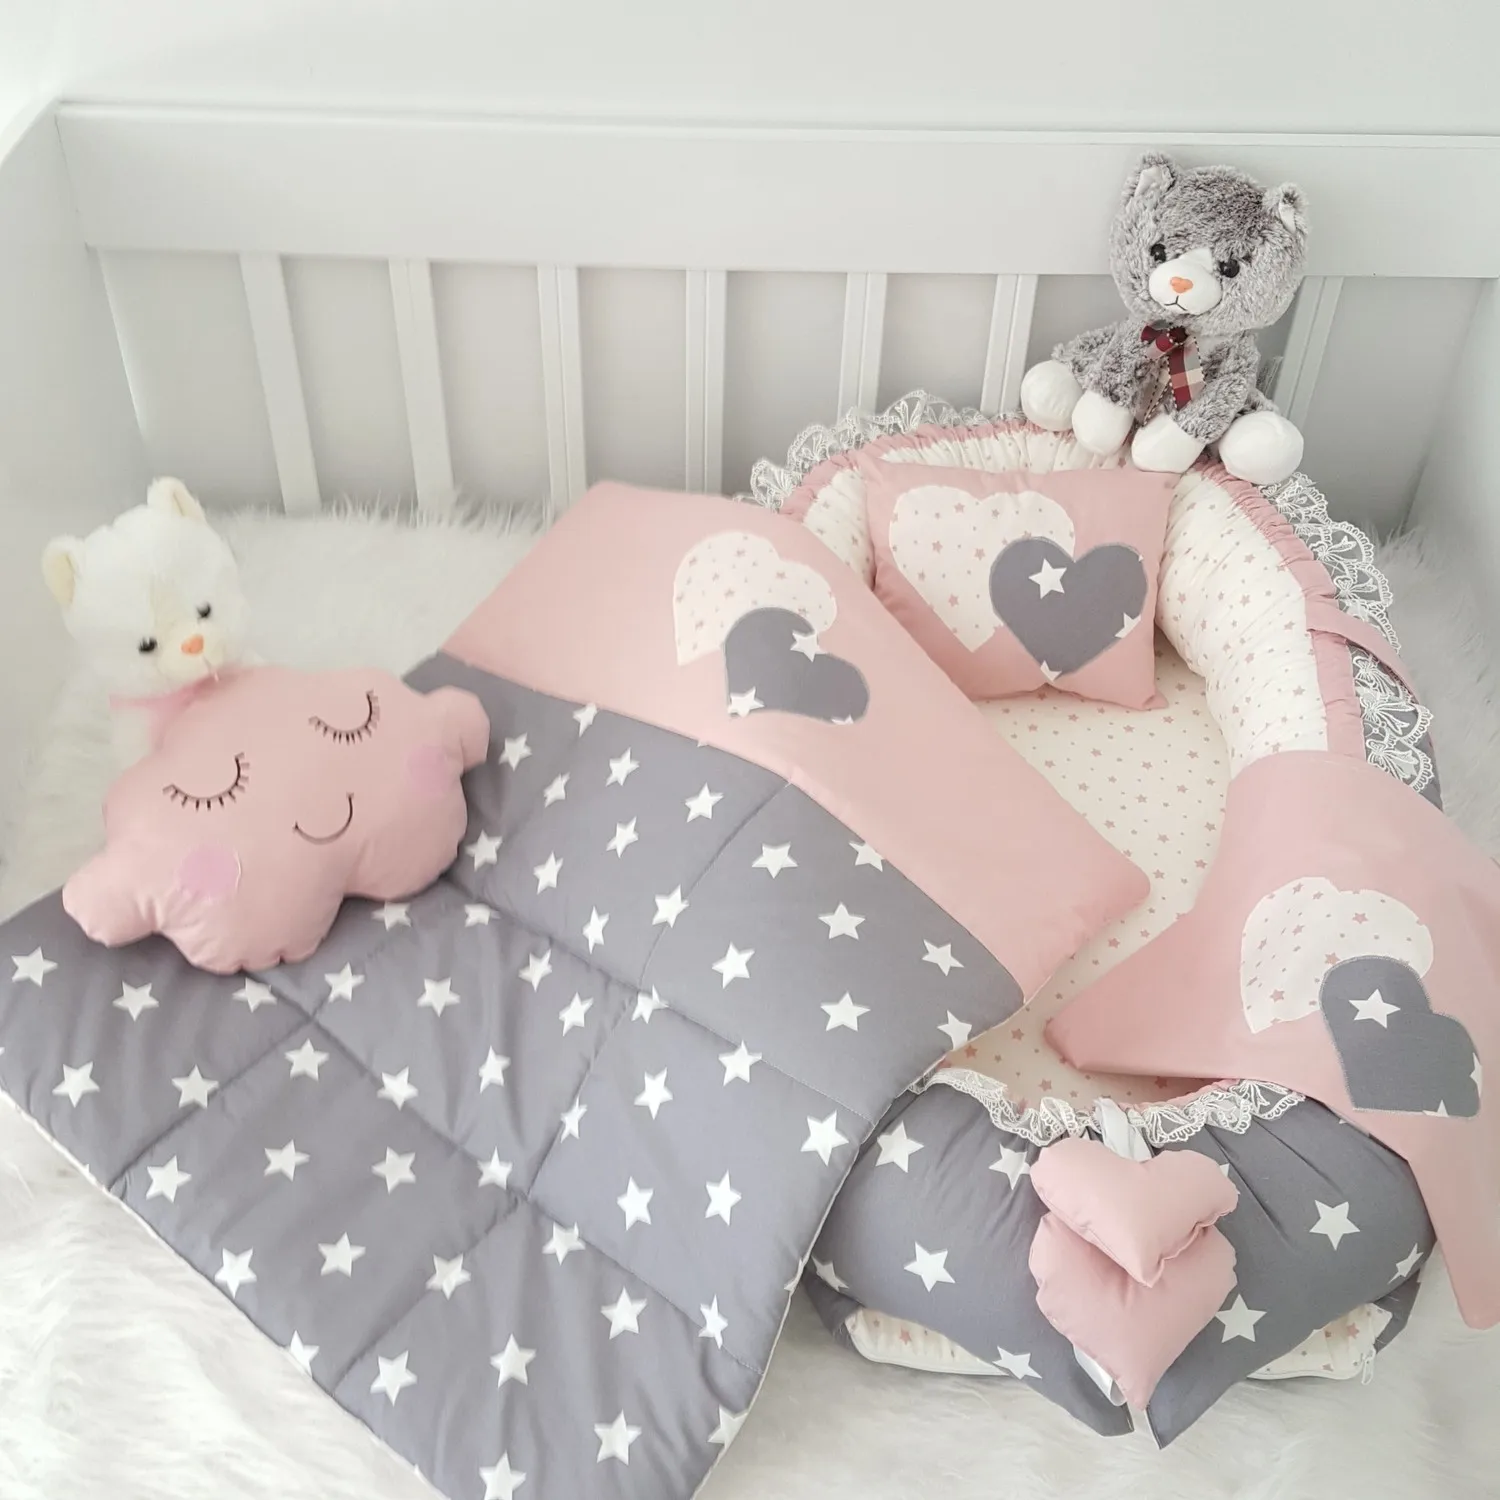 Jaju Baby Handmade Gray and Powder Star Design Orthopedic Lux Babynest 6 Pieces Set Mother Side Portable Baby Bed